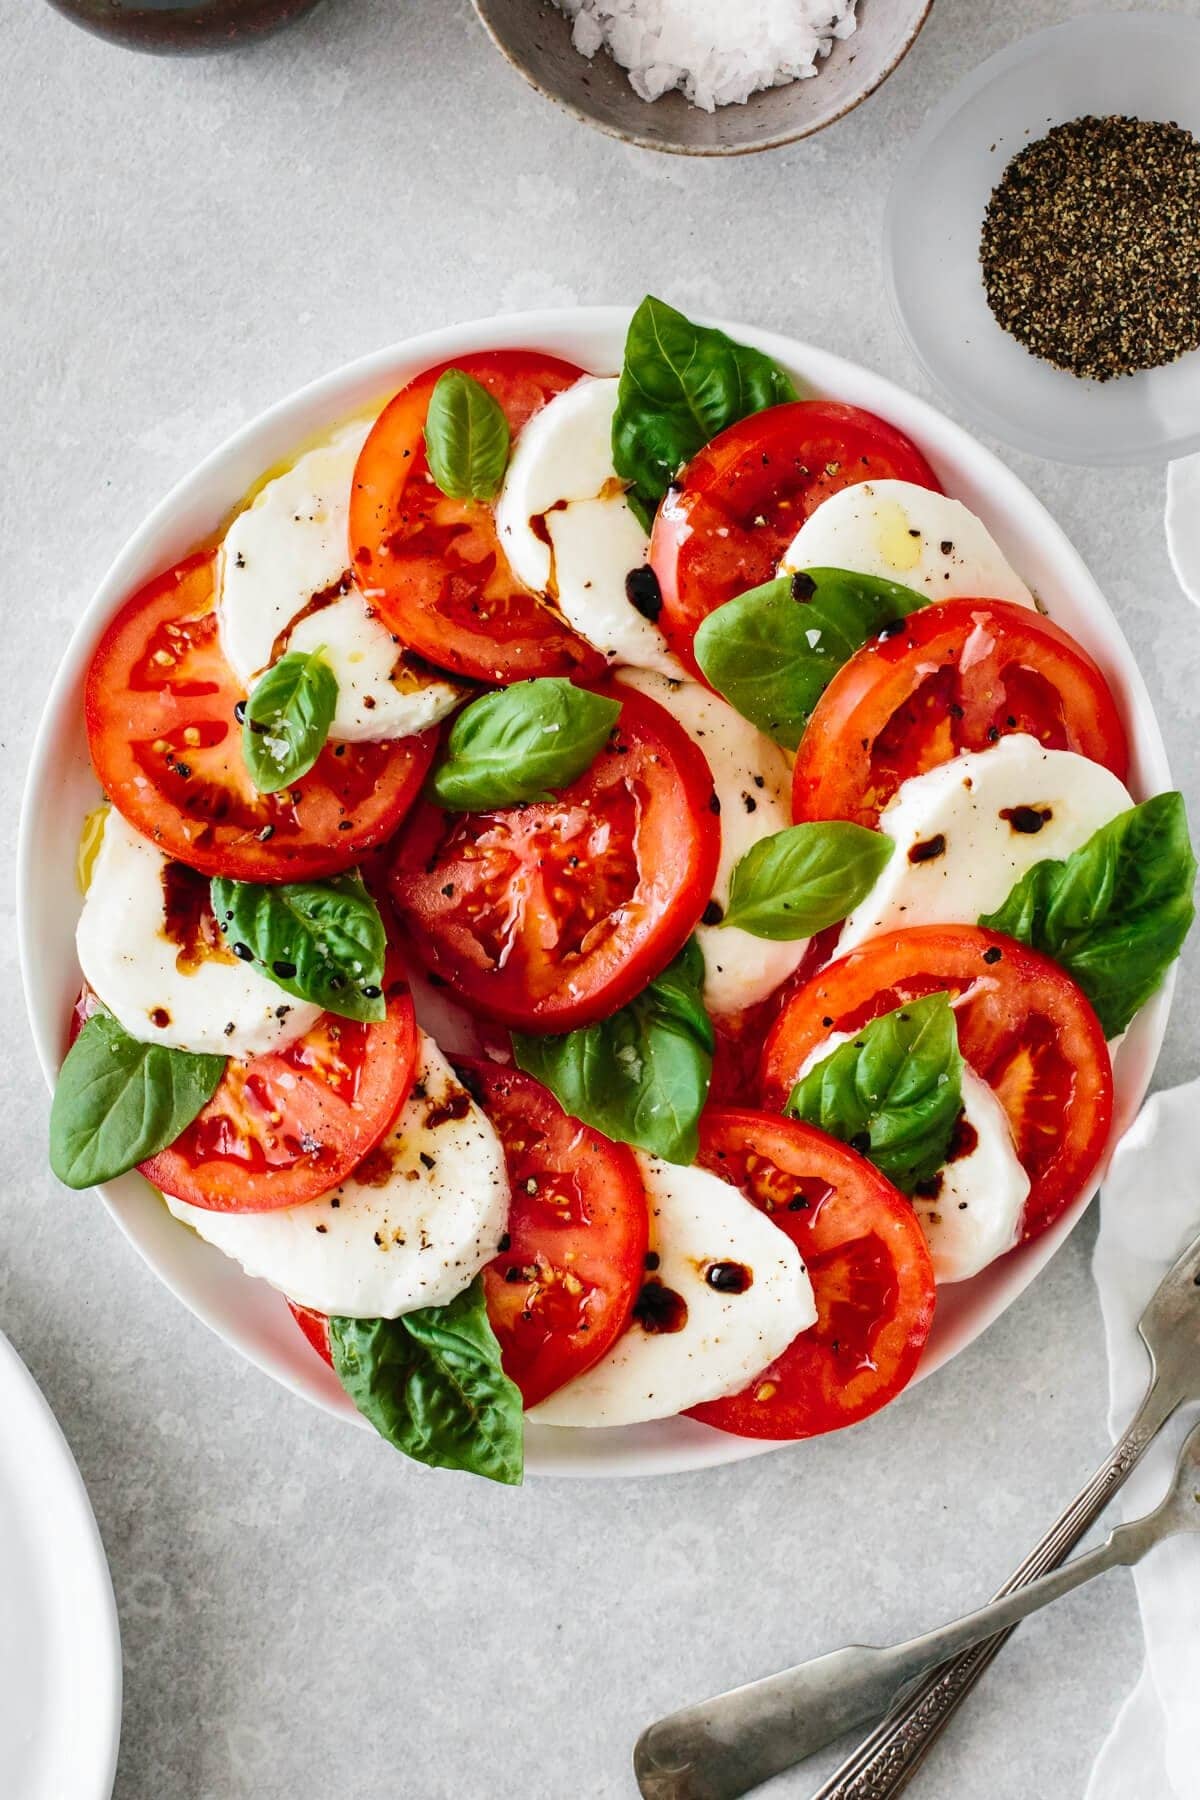 Homemade Caprese Salad with tomatoes, mozzarella, basil. olive oil and balsamic vinegar